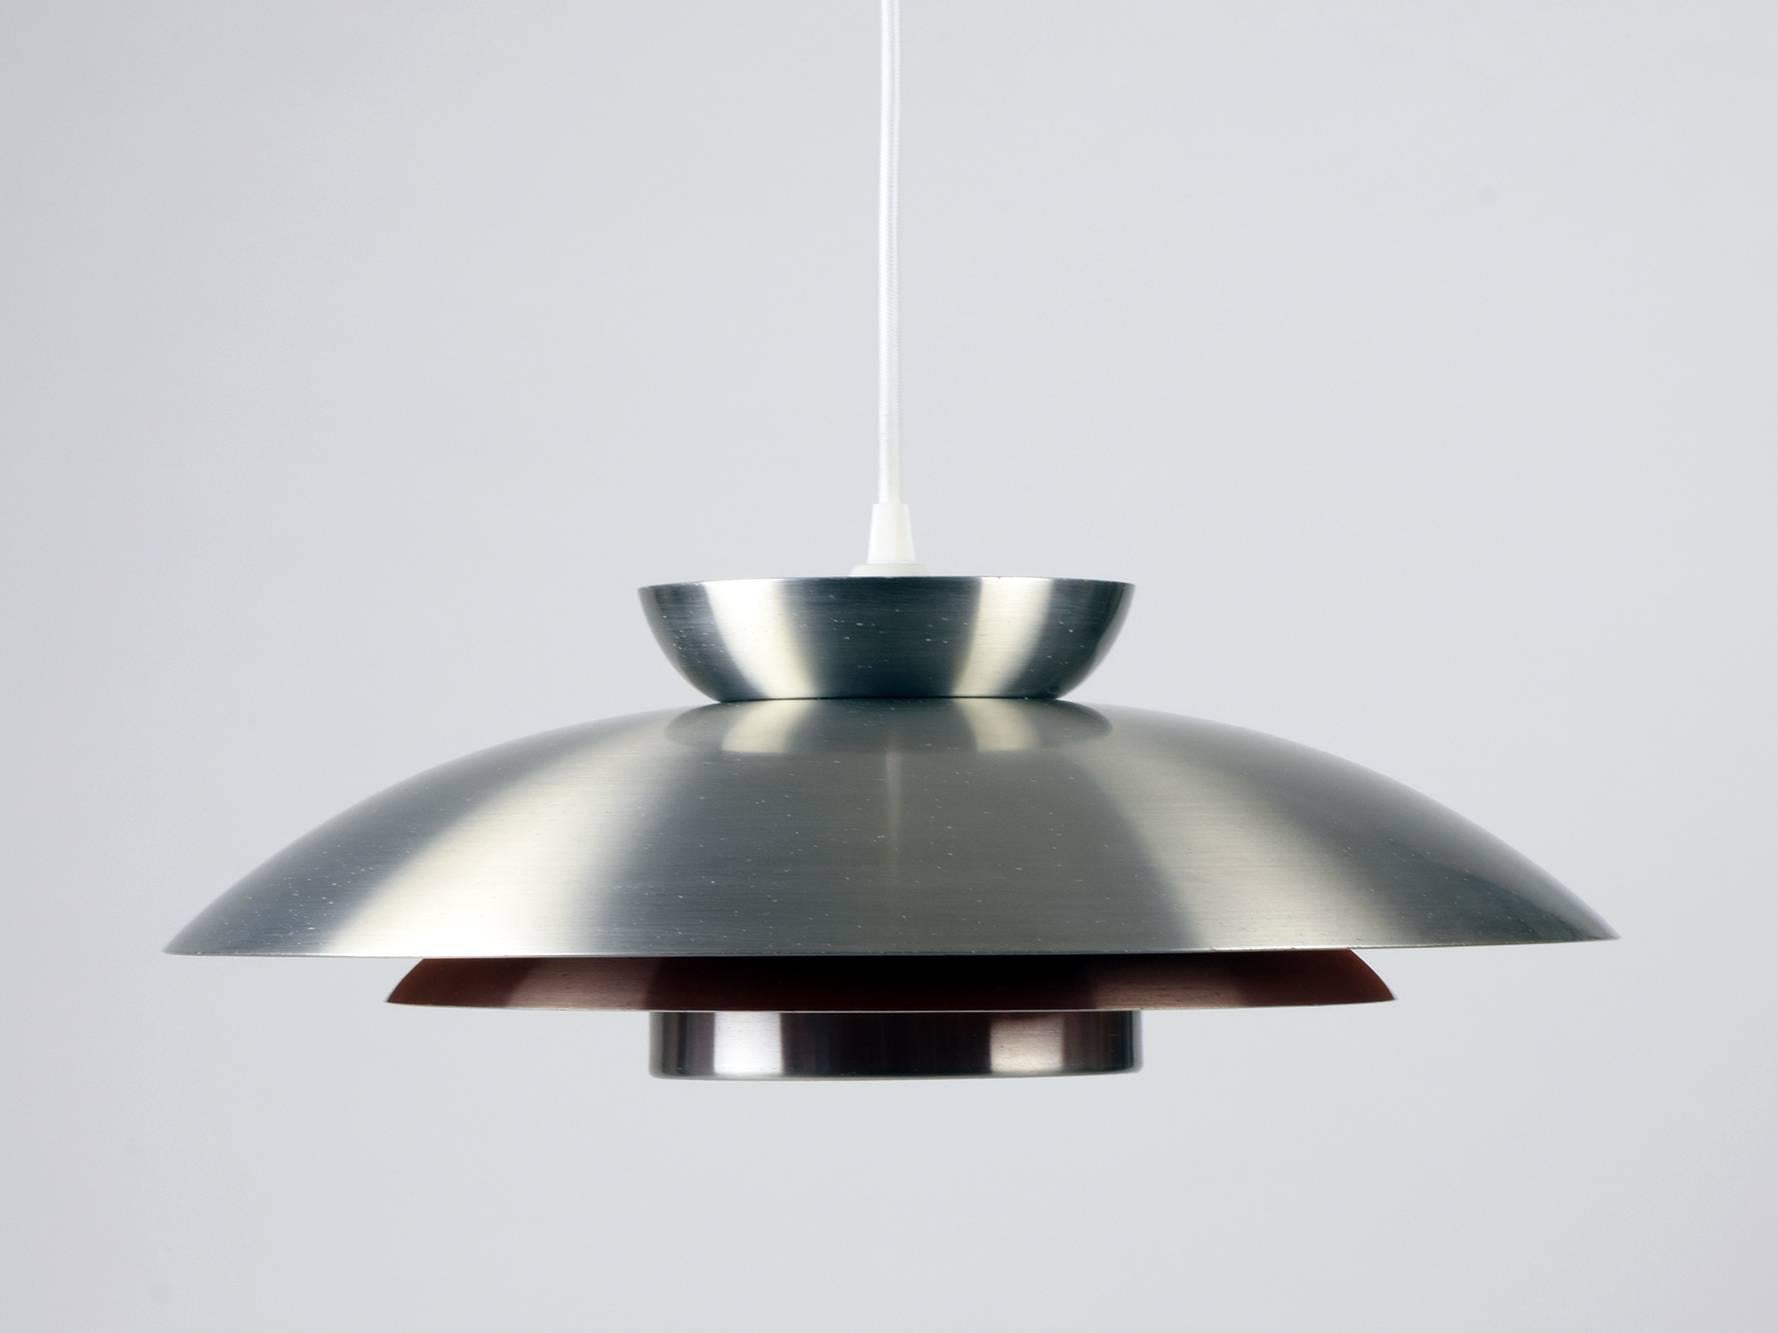 Carl Thore / Sigurd Lindkvist (attributed).
Granhaga (Manufacturer), Sweden.
Ceiling pendant, 1960s.

Brushed metal with orange and white enameled metal inner surfaces.

Attributed to Carl Thore / Sigurd Lindkvist because of the very similar